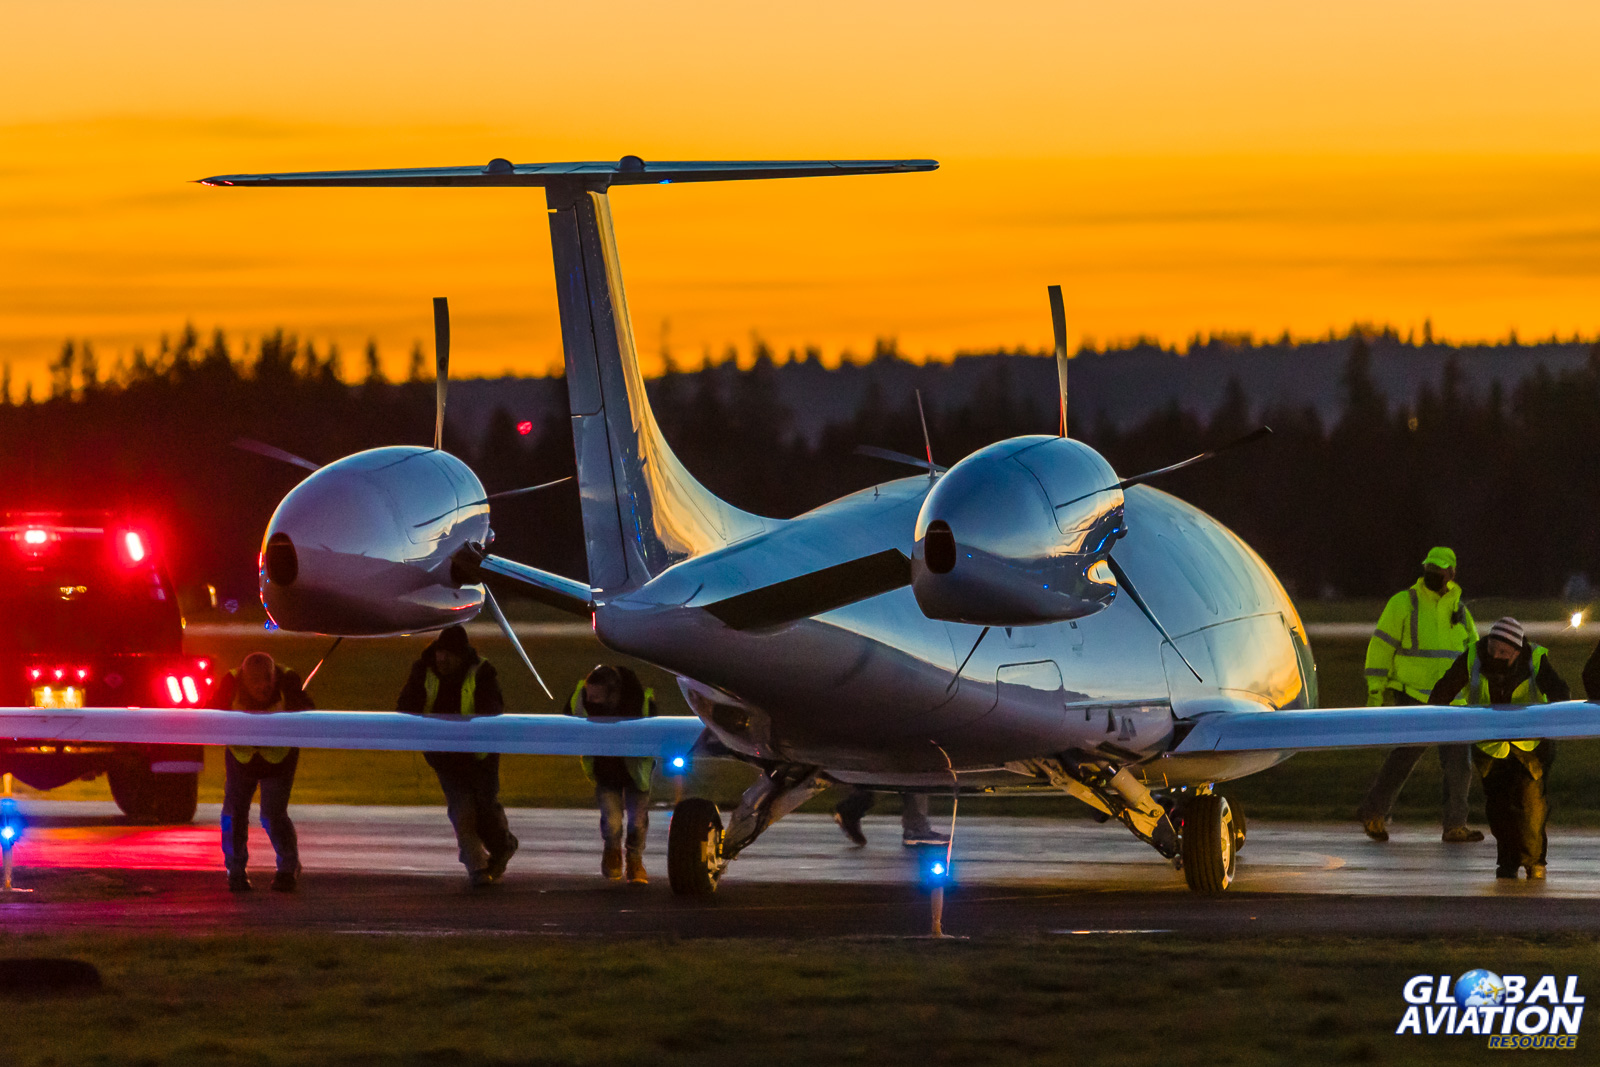 The sun has set but the sky's remaining light emphasises the airframe shape © Rob Edgcumbe - Global Aviation Resource